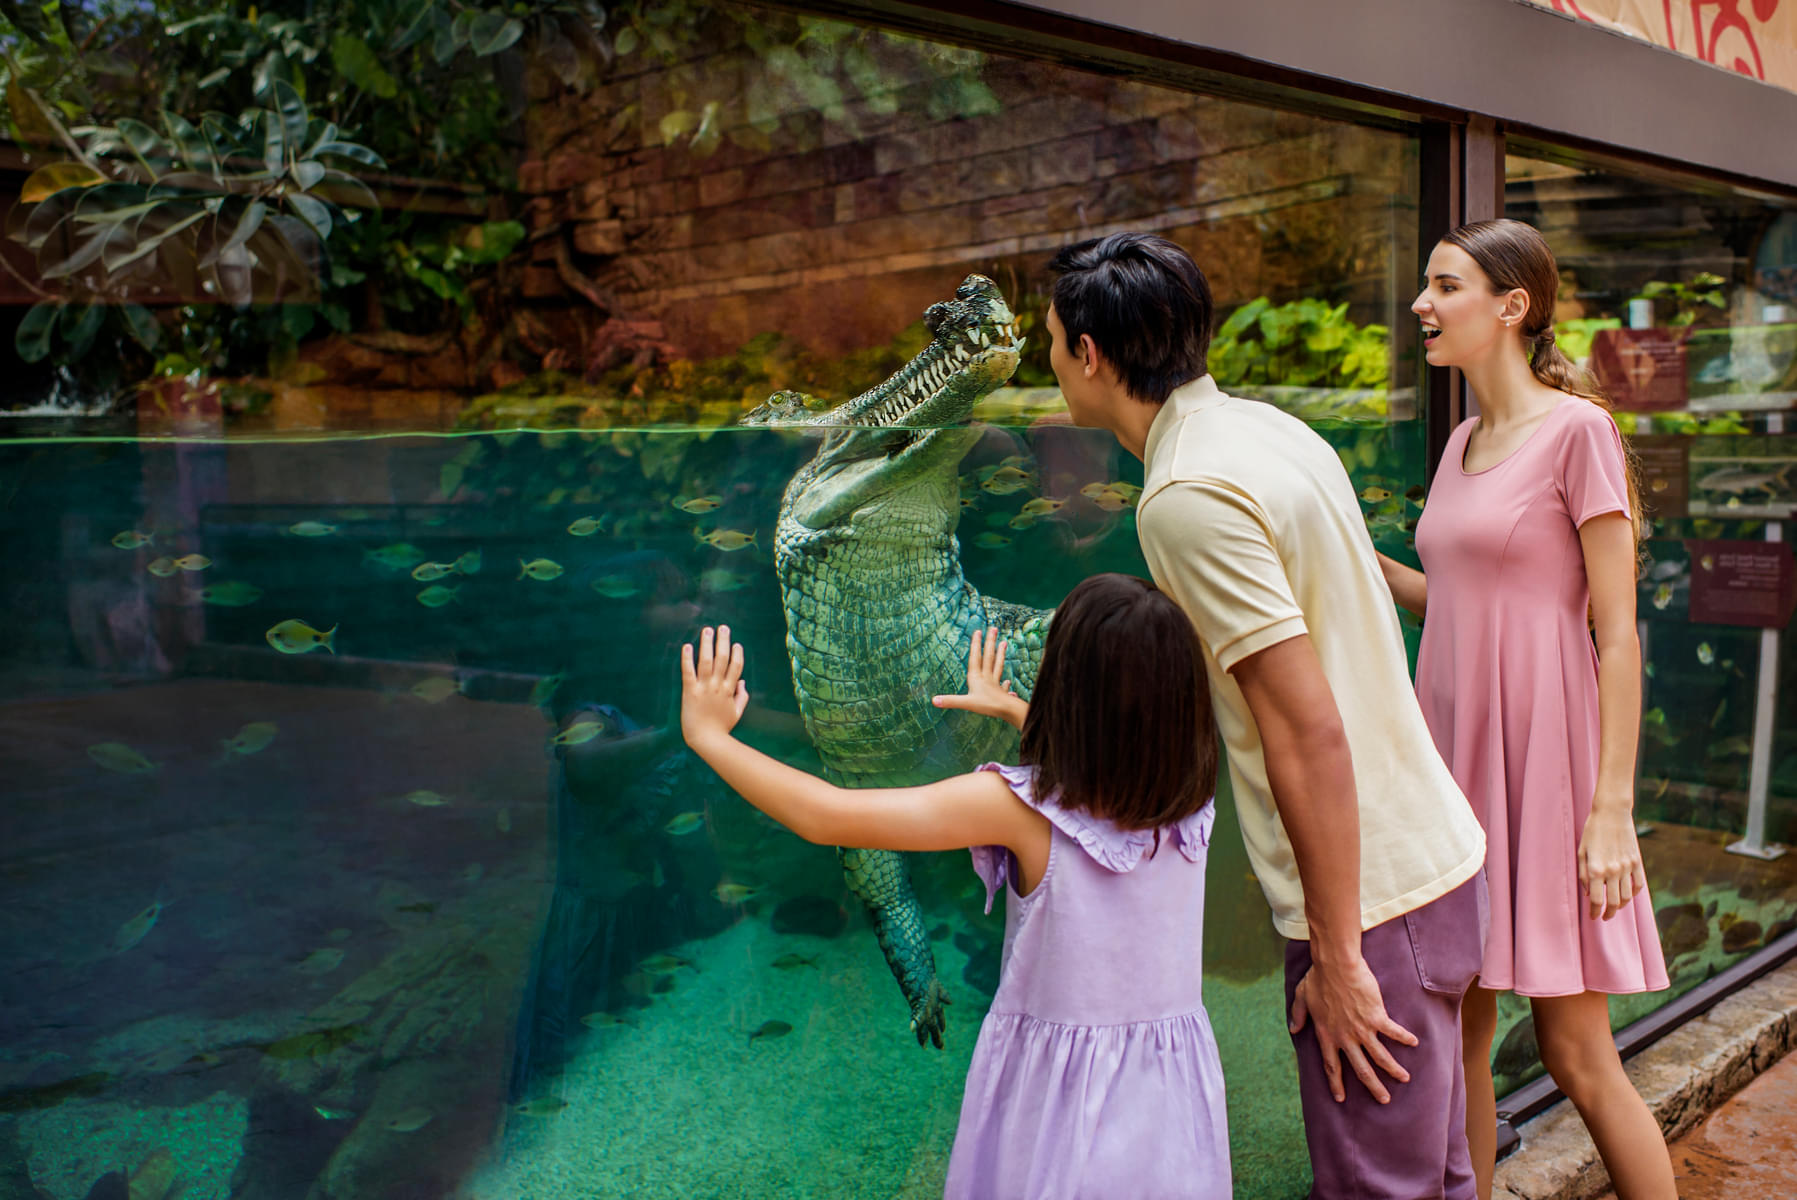 Have a fun time with your family as you explore the amazing wildlife park